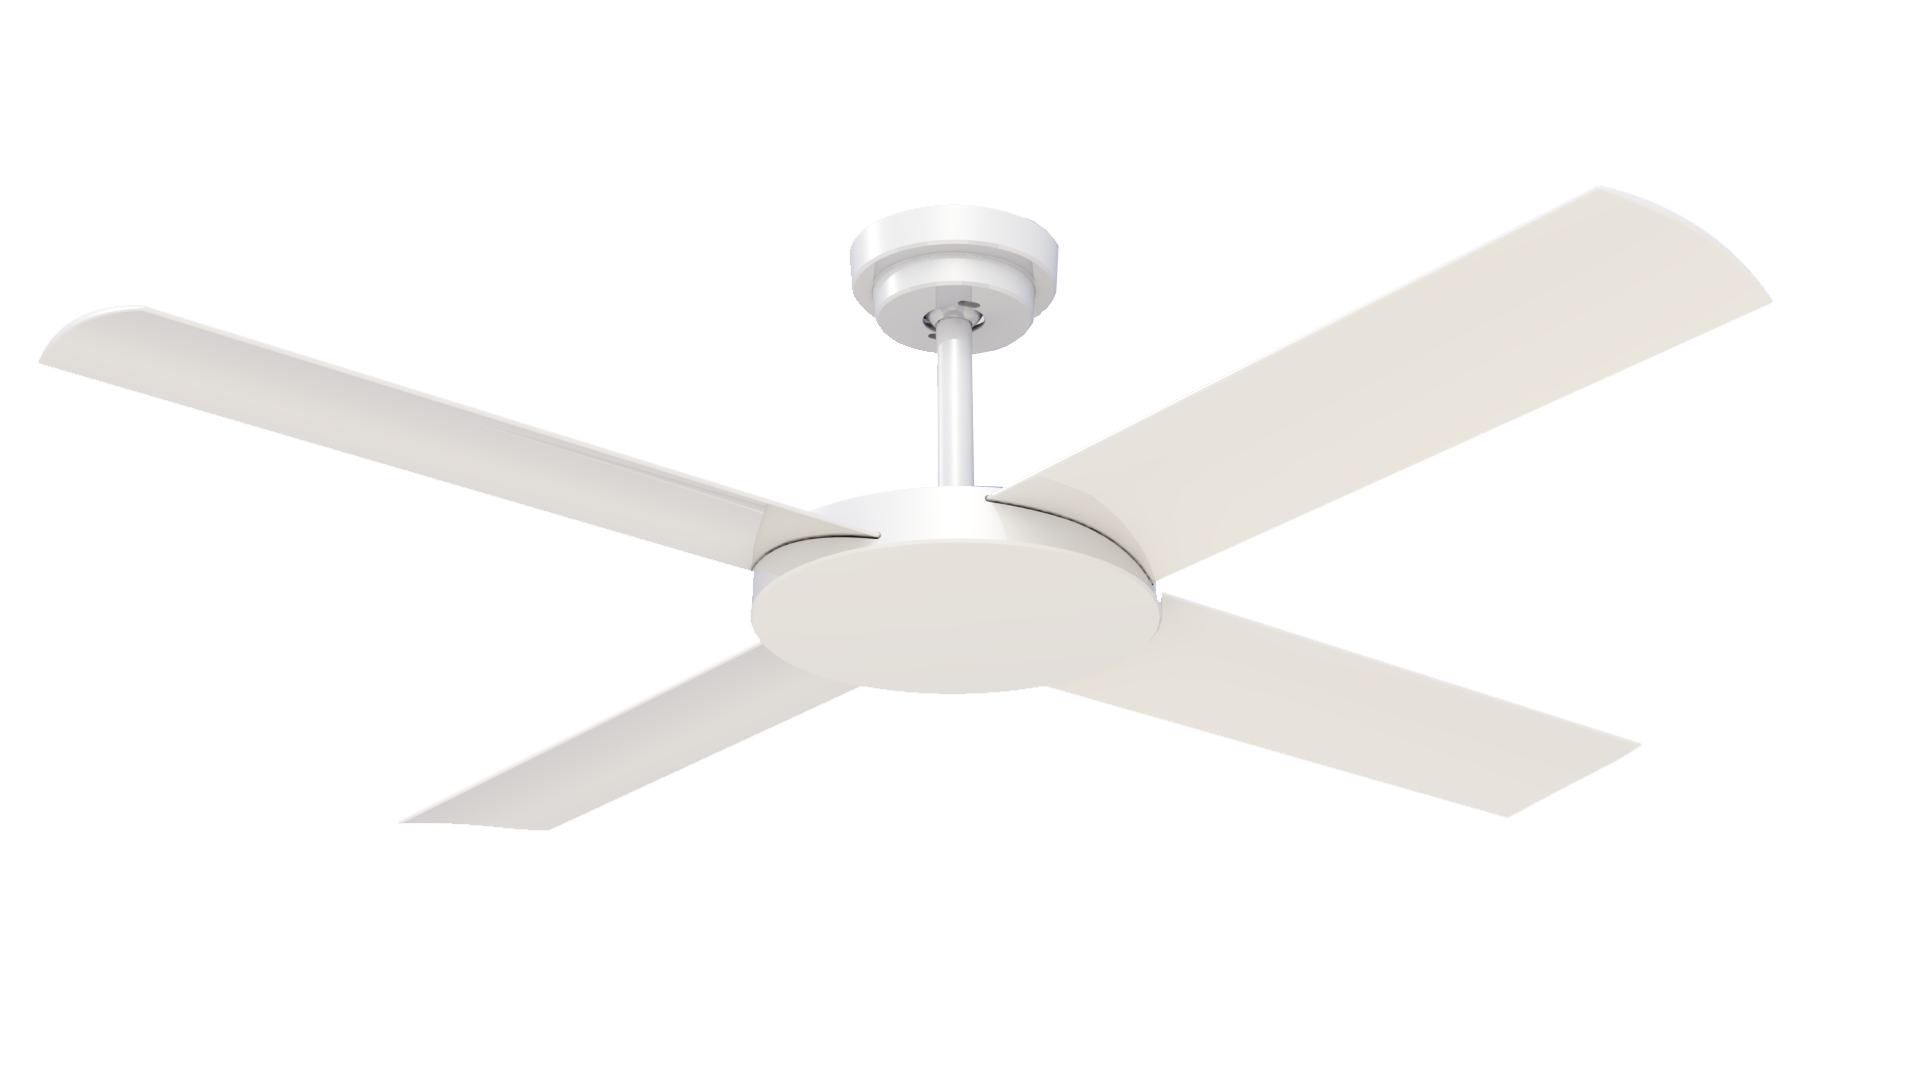 Revolution 3 White 52" Indoor/Outdoor Ceiling Fan with Wall Control